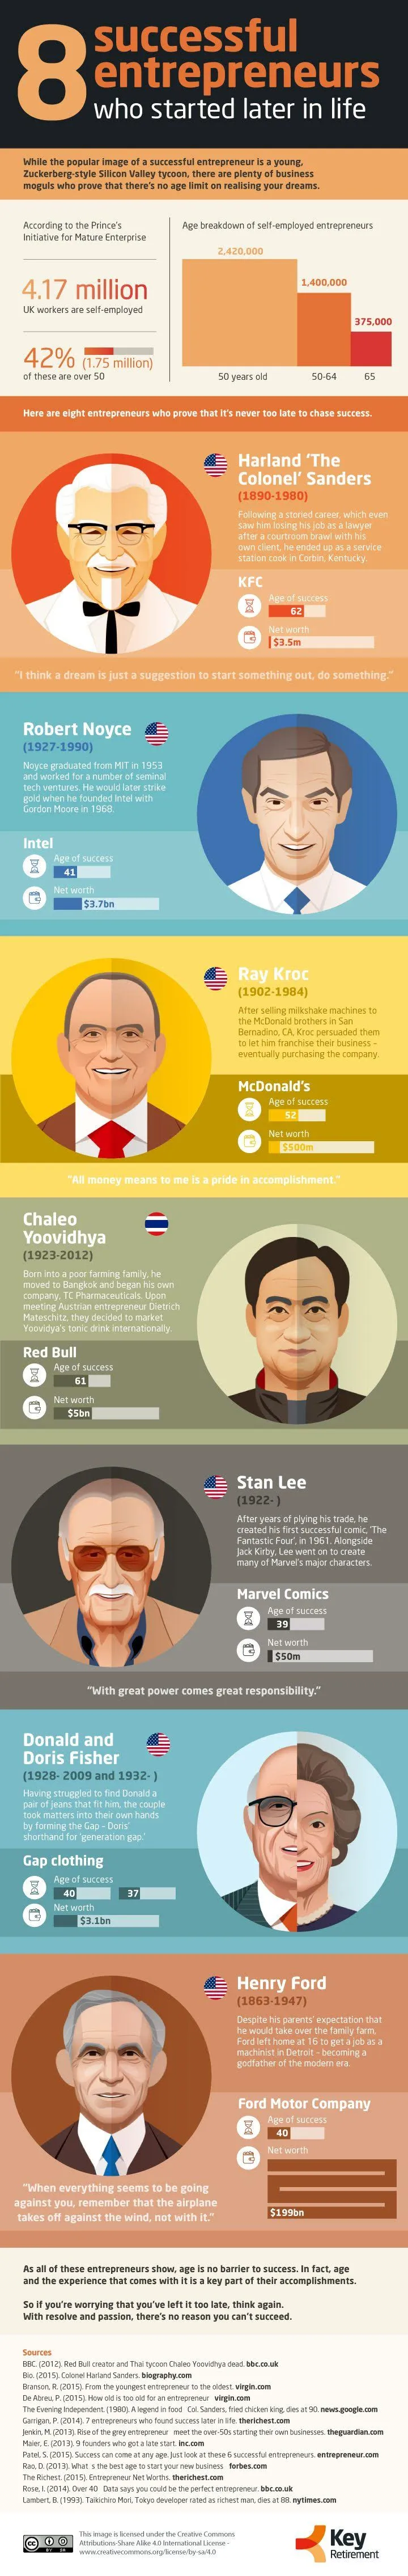 It’s Never Too Late! 8 Successful Entrepreneurs Who Started Later in Life - infographic